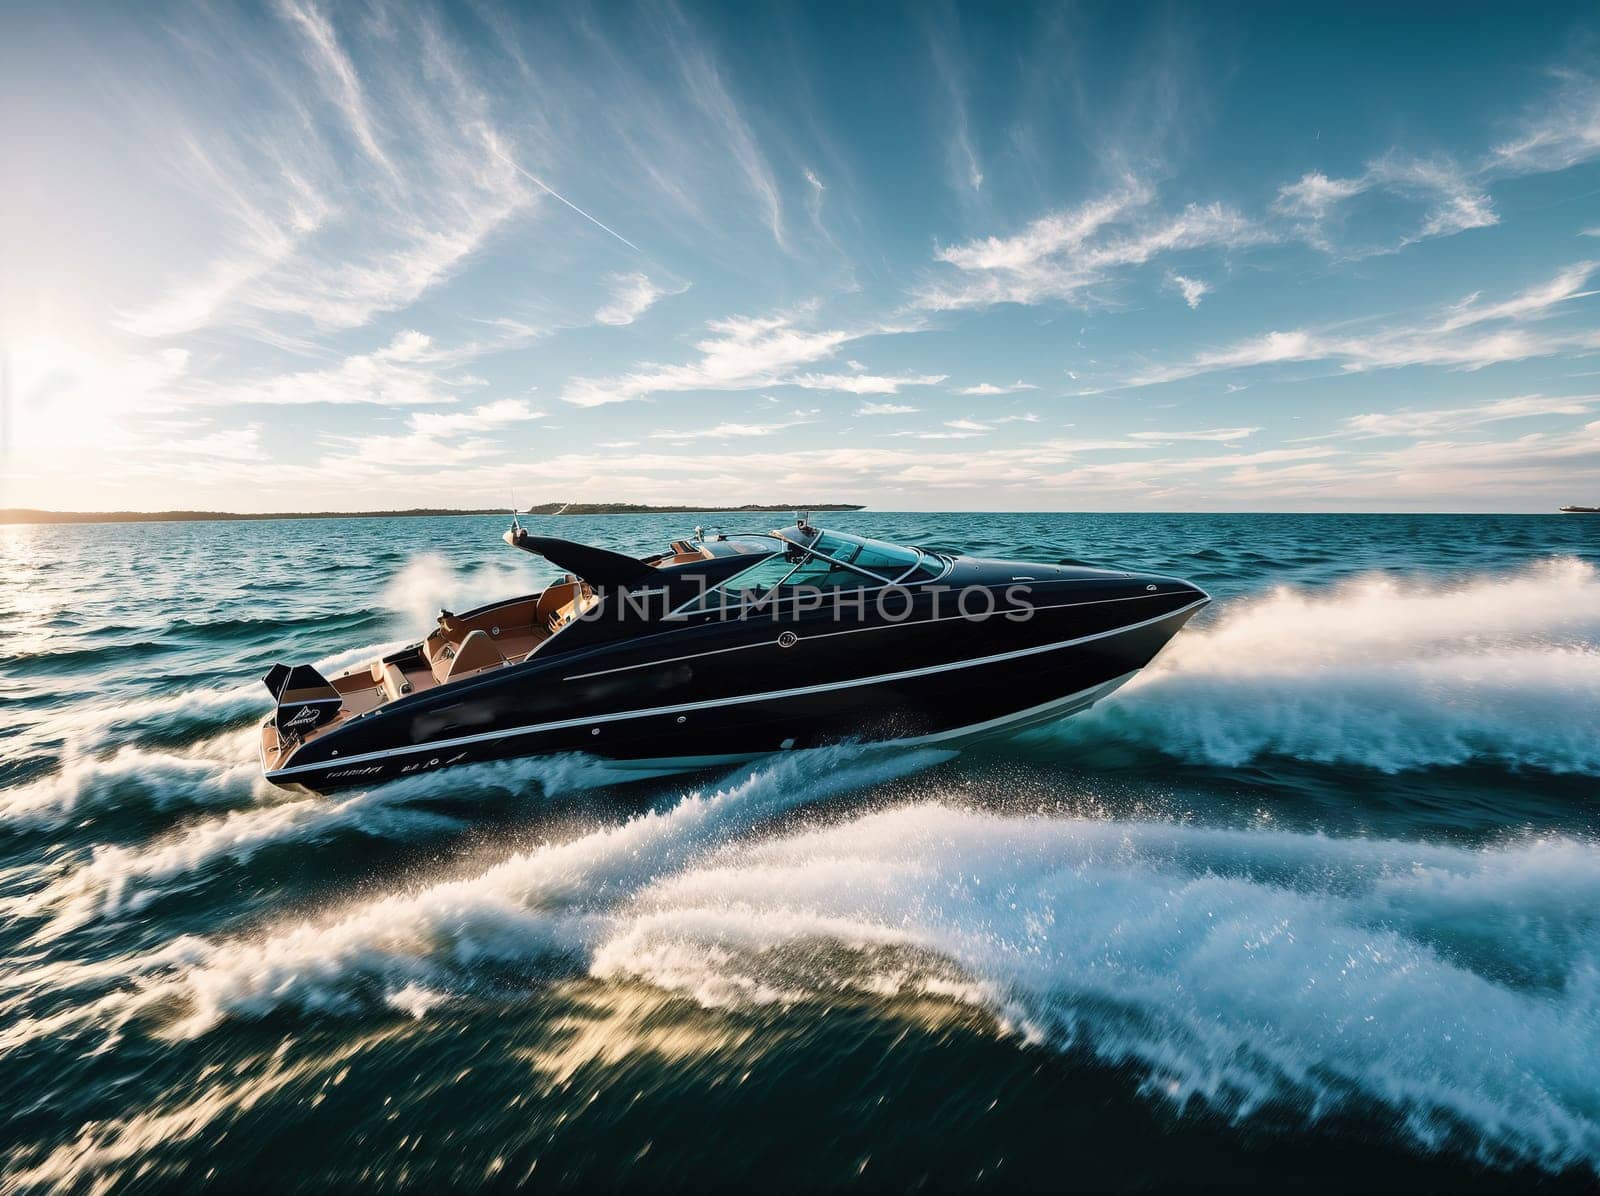 The image shows a speeding boat on the water with the sun setting in the background.